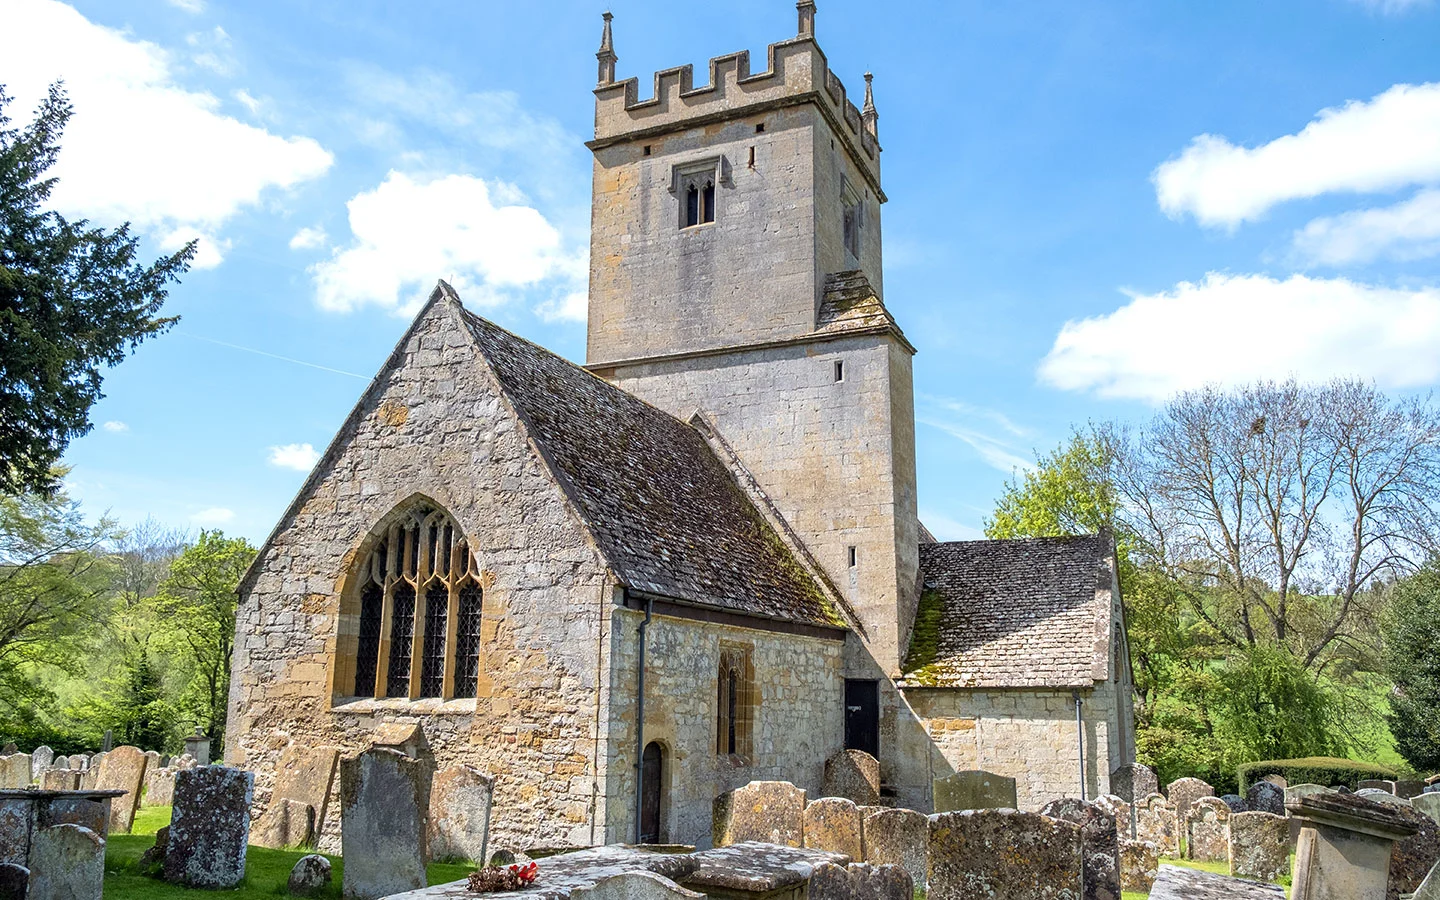 St Eadburgha’s Church near Broadway in the Cotswolds